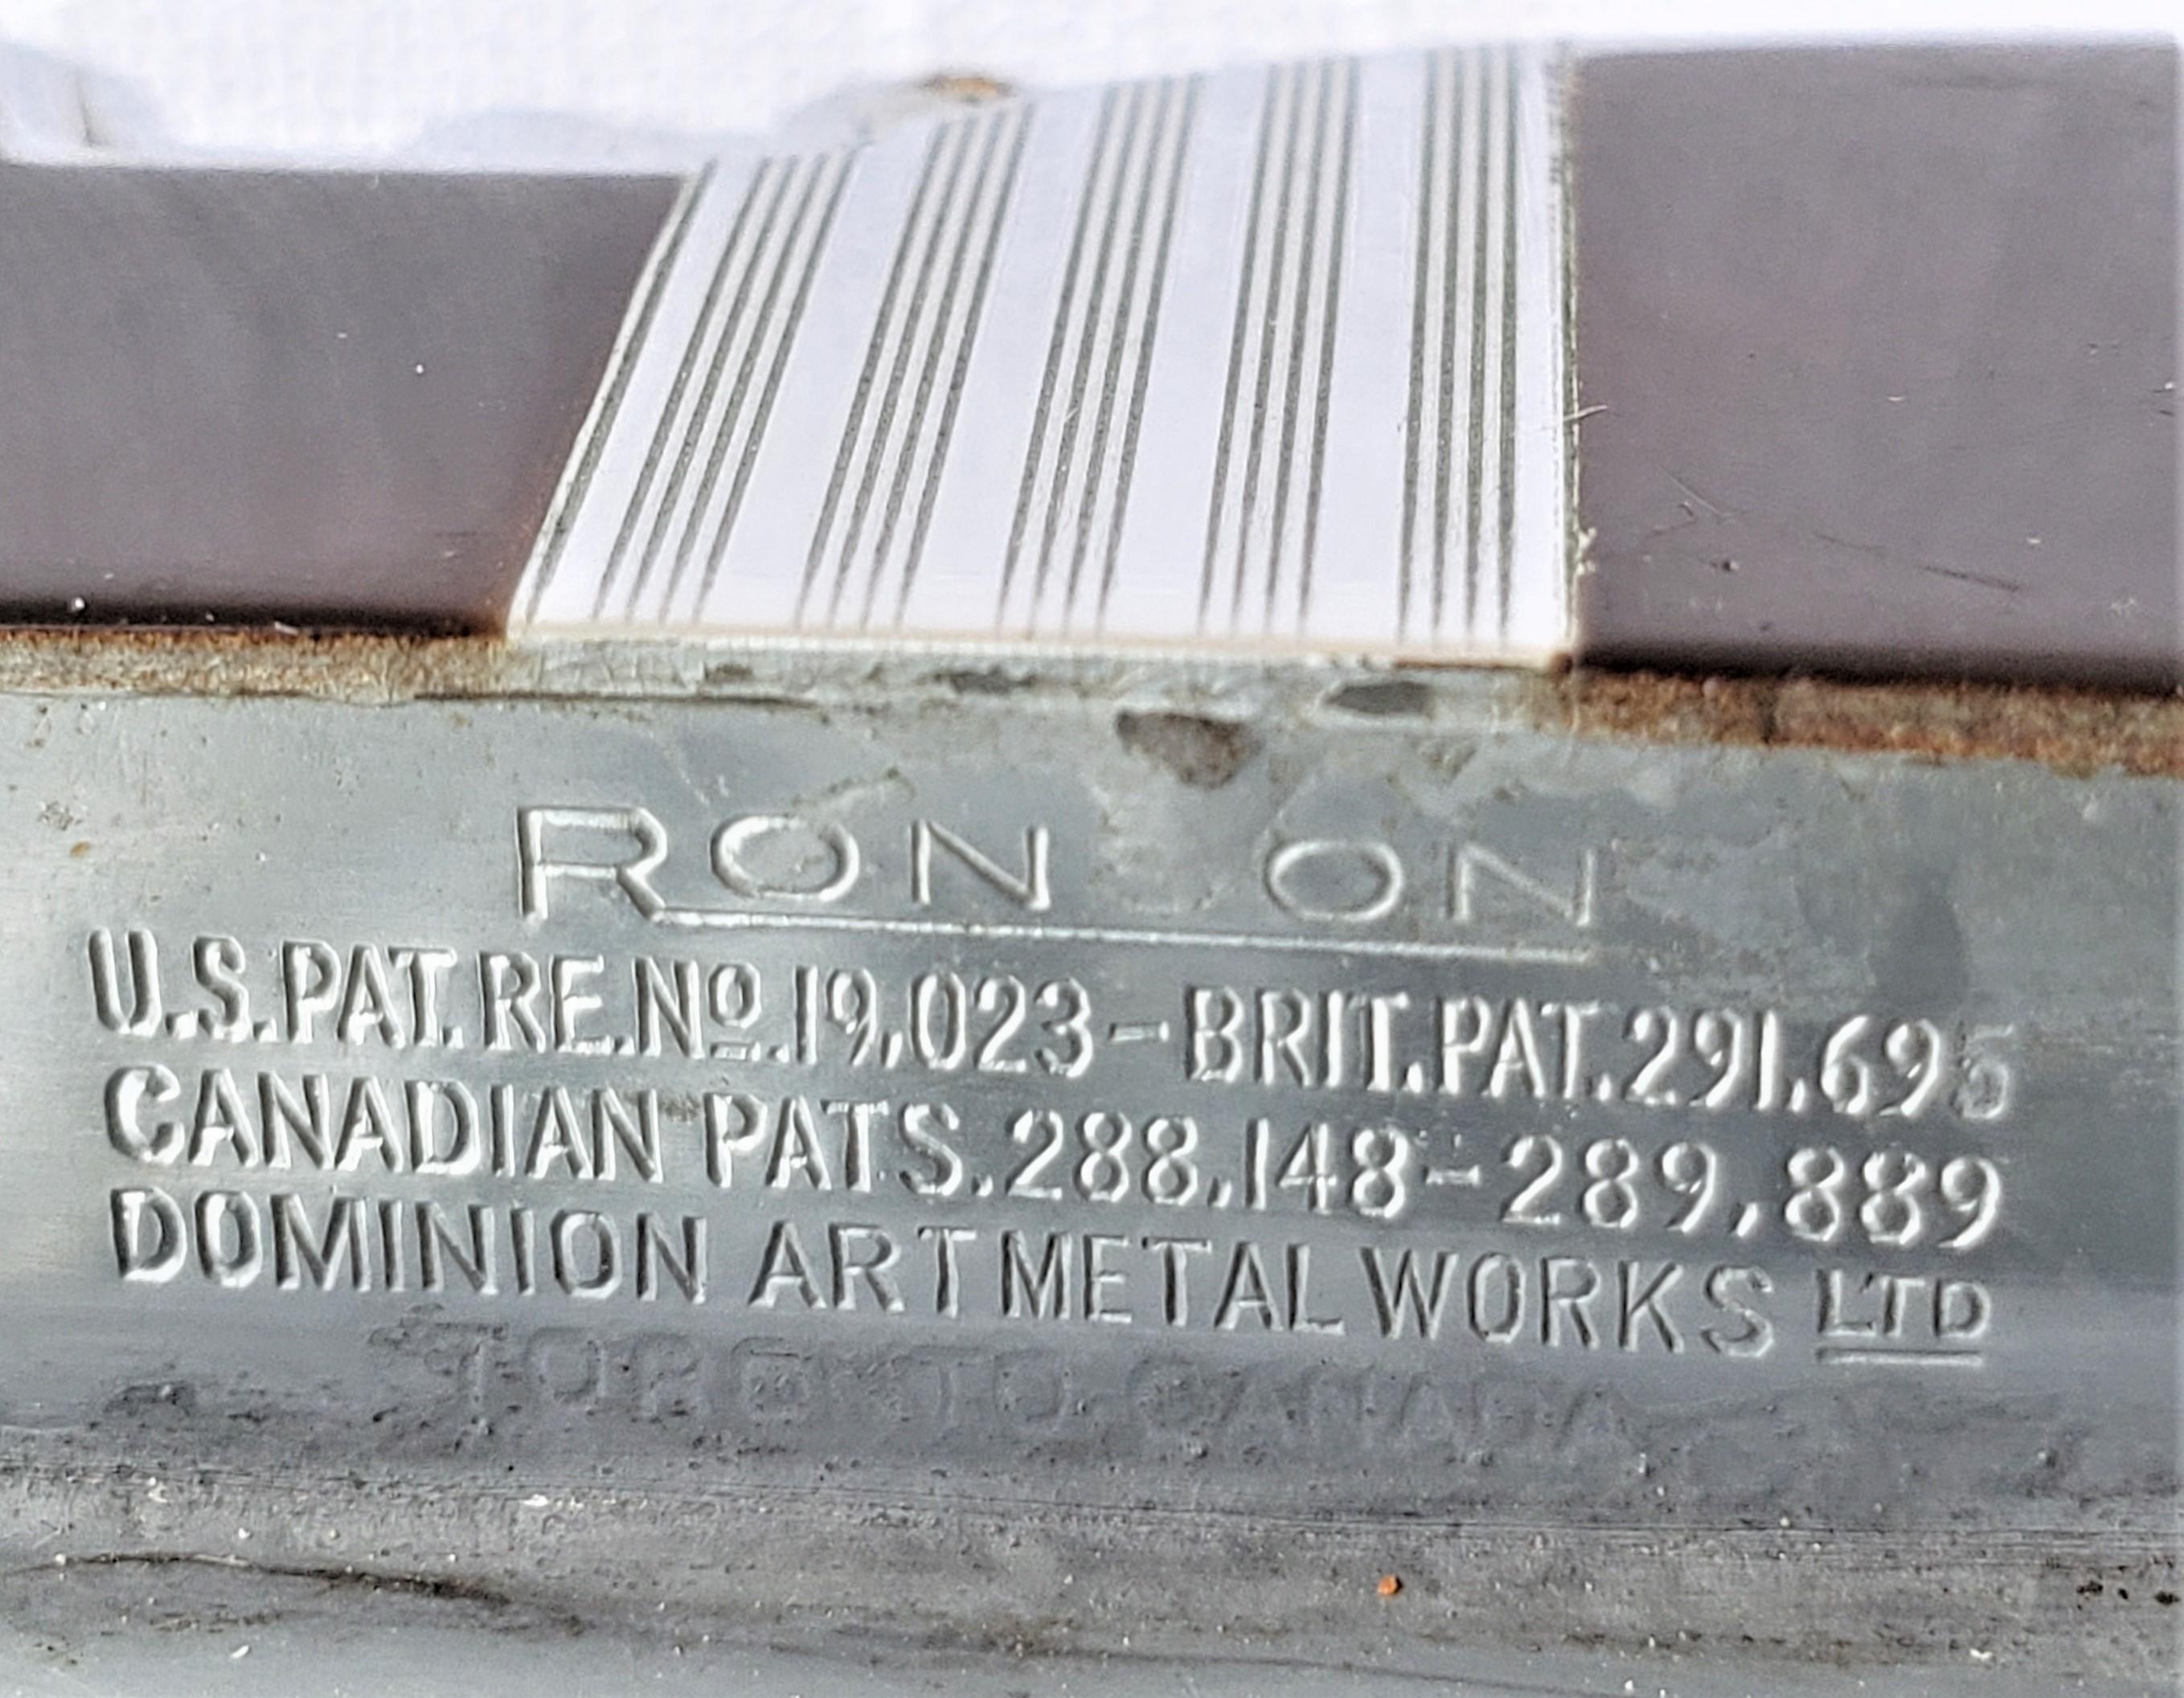 Ronson Art Metal Works Chrome & Enamel Cigarette Case with Built In Lighter In Good Condition For Sale In Hamilton, Ontario